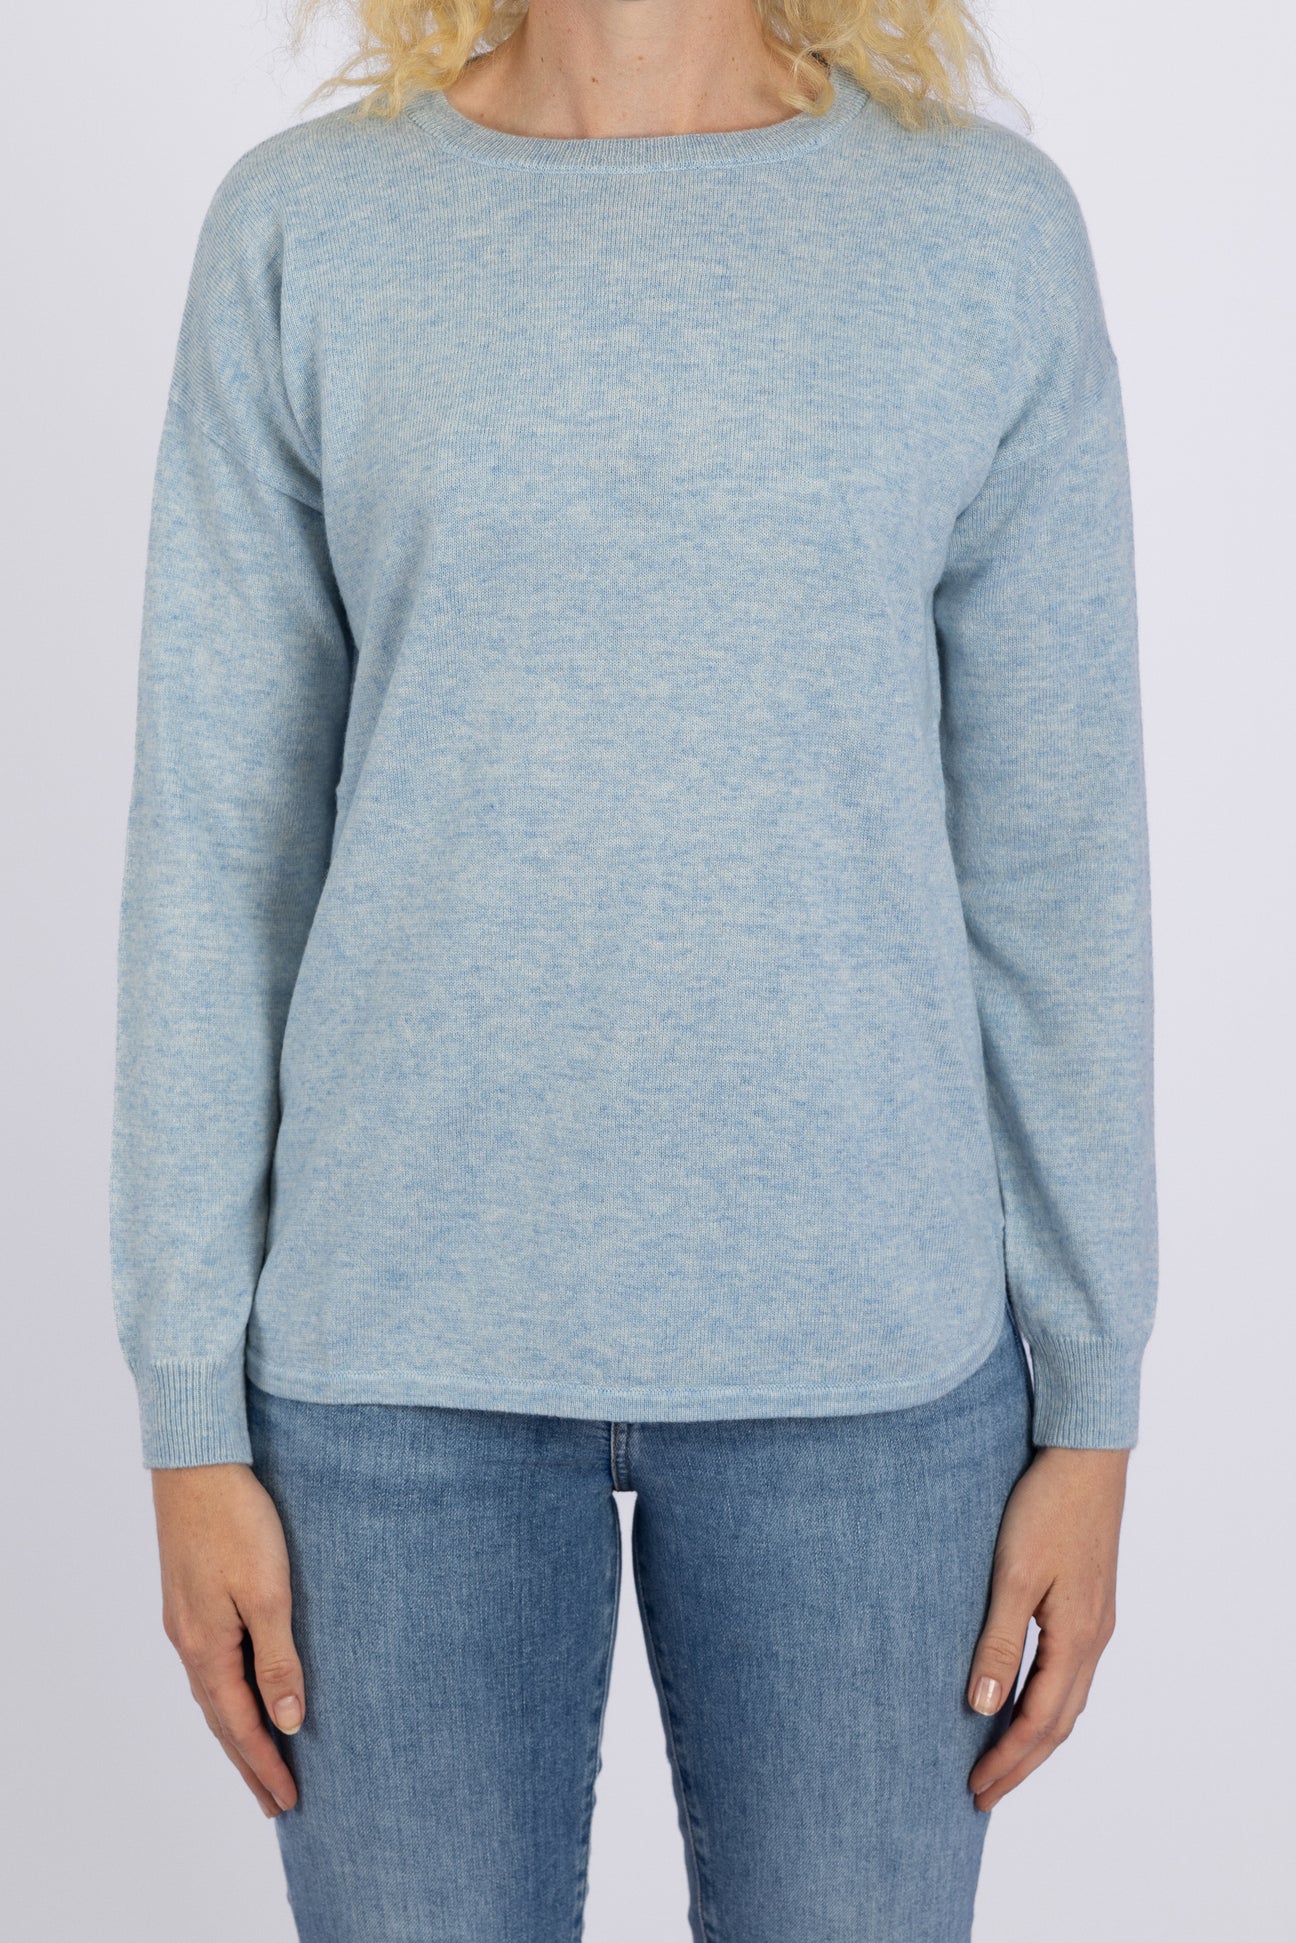 Bow and Arrow - Swing Jumper with Blue Betsy Liberty Patches - Pale Blue